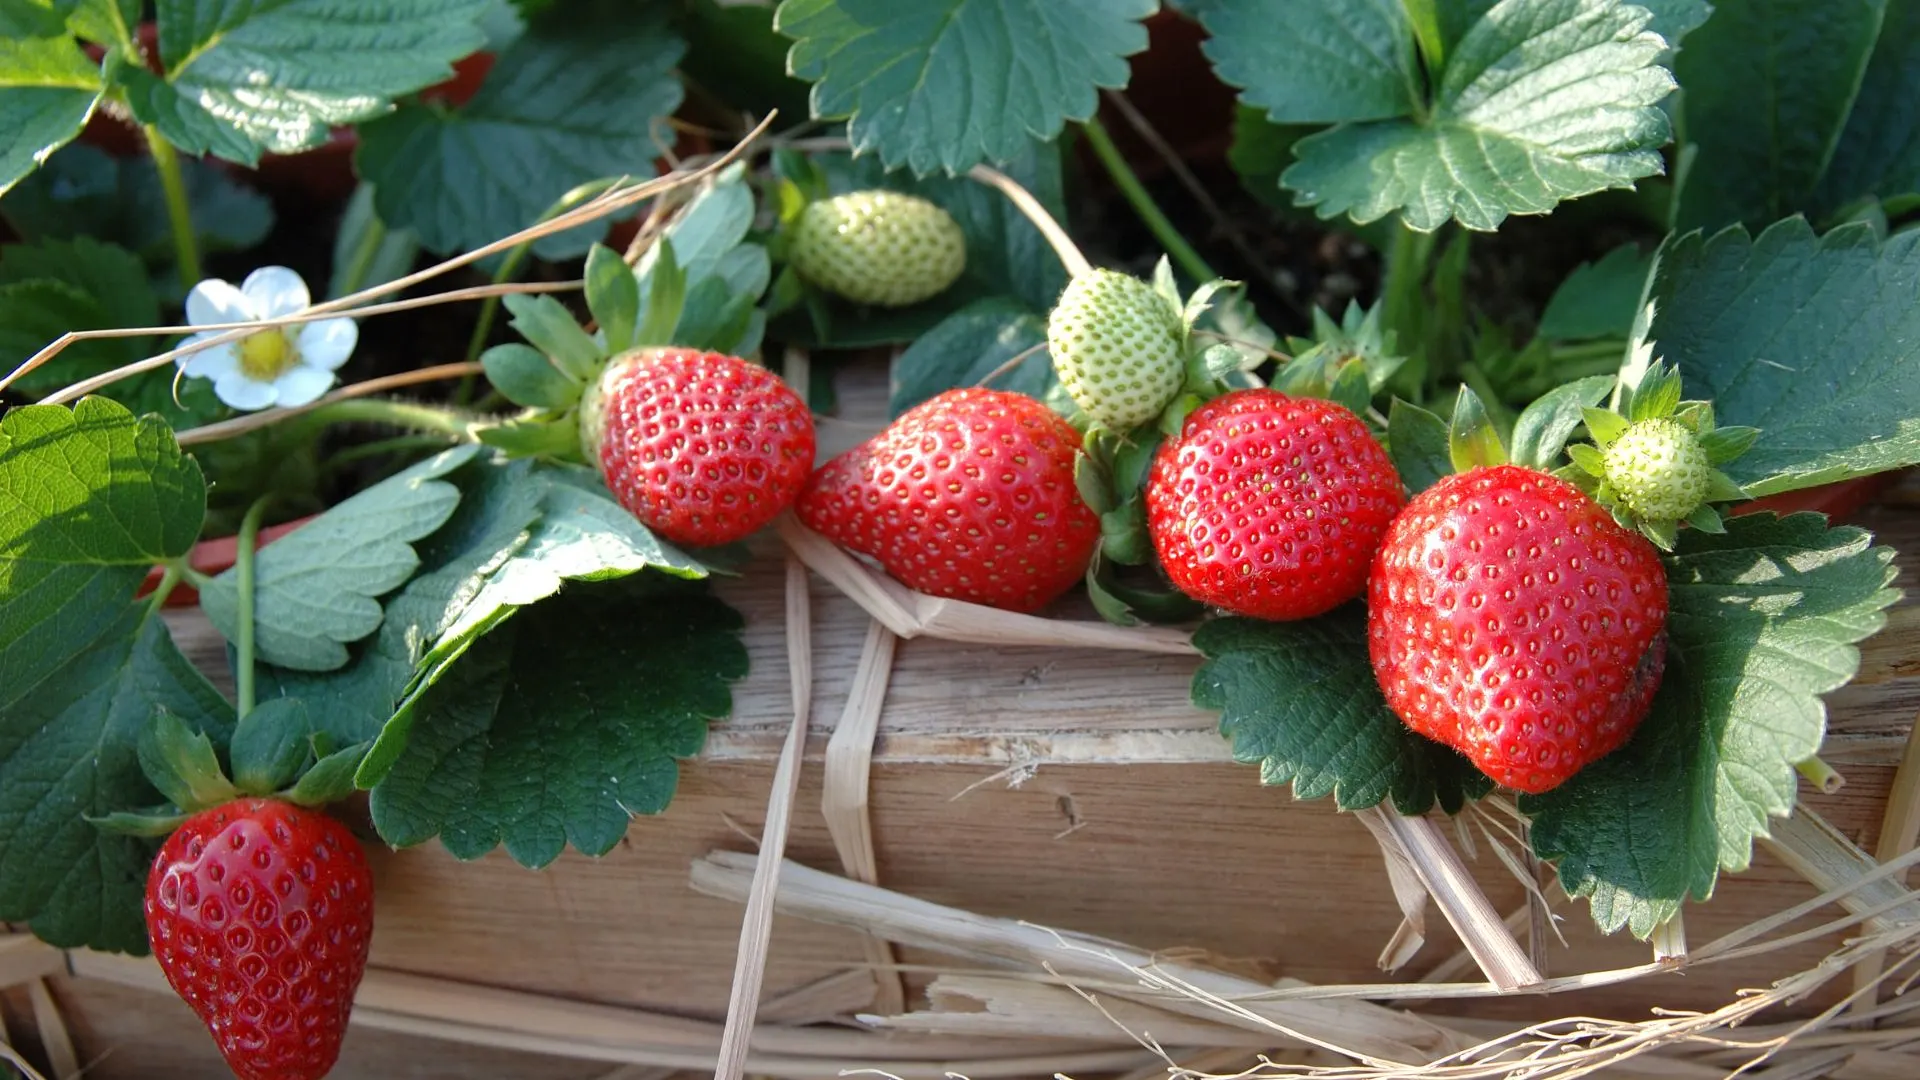 companion plants with strawberries